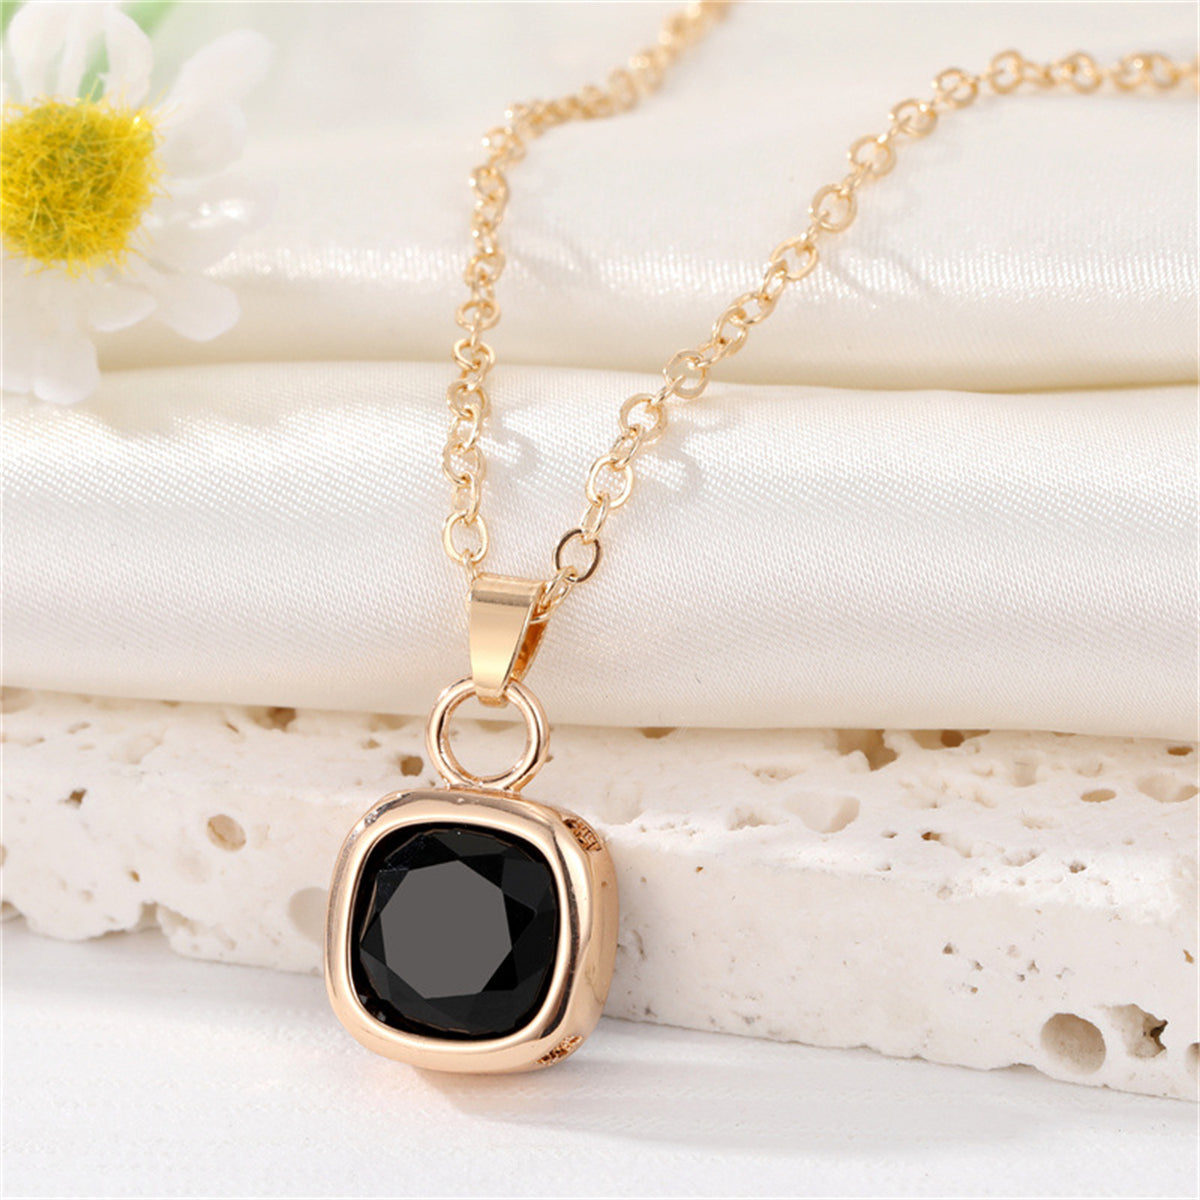 Black Crystal & 18K Gold-Plated Square Pendant Necklace